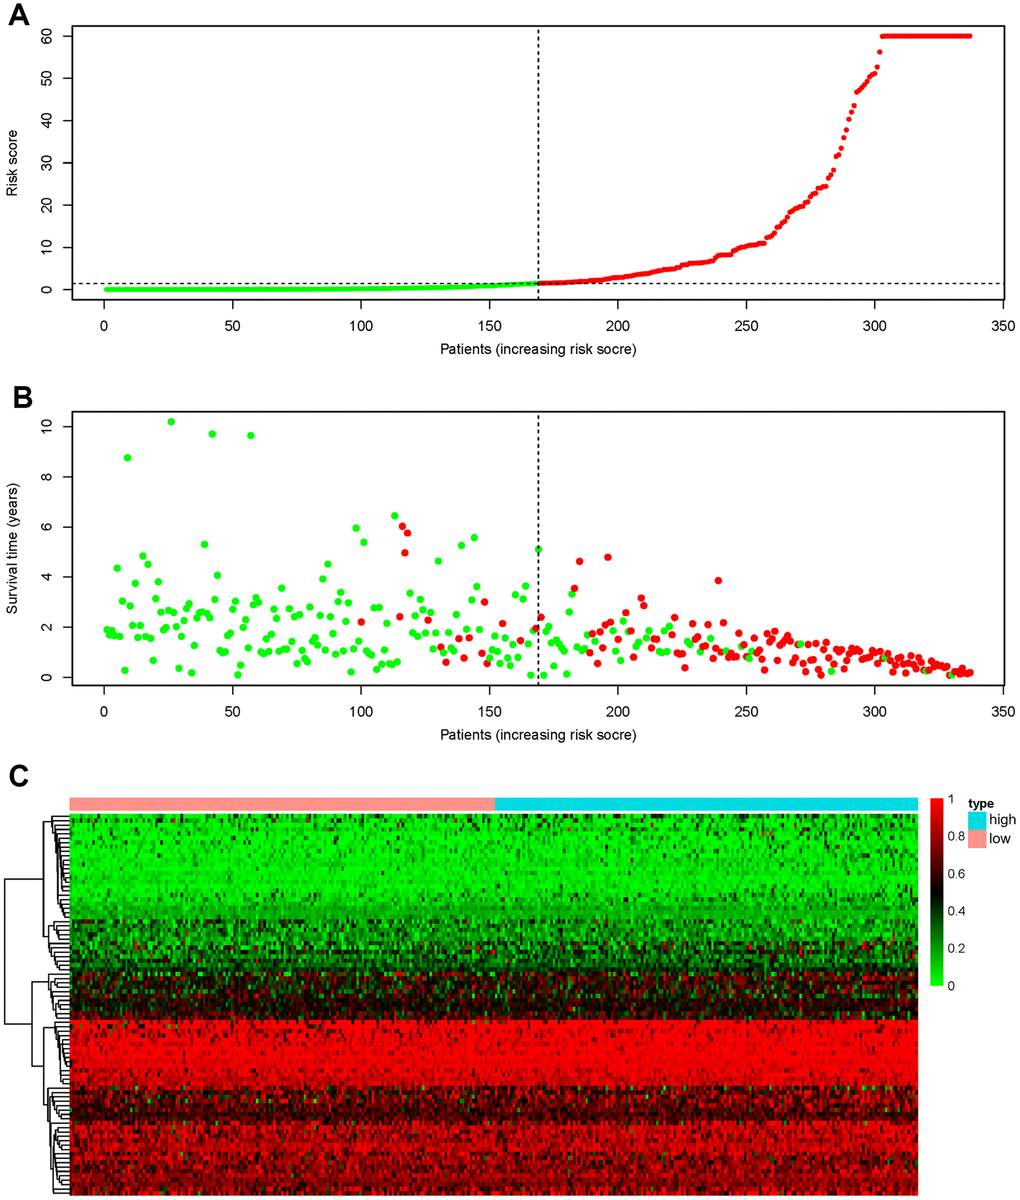 Recognition capability of the final prognostic signature for GC patients into low- and high-risk groups. (A) The risk scores of 337 patients. Green/red dots represent low/high risk groups that are distinguished using the dotted lines. (B) Overall survival status and survival duration of GC patients. Dotted lines were used to distinguish patients in the high- and low-risk groups. Green dots represent surviving patients, while red dots indicate dead patients. (C) Heatmap of PSI values of AS events for building the final prognostic signature.